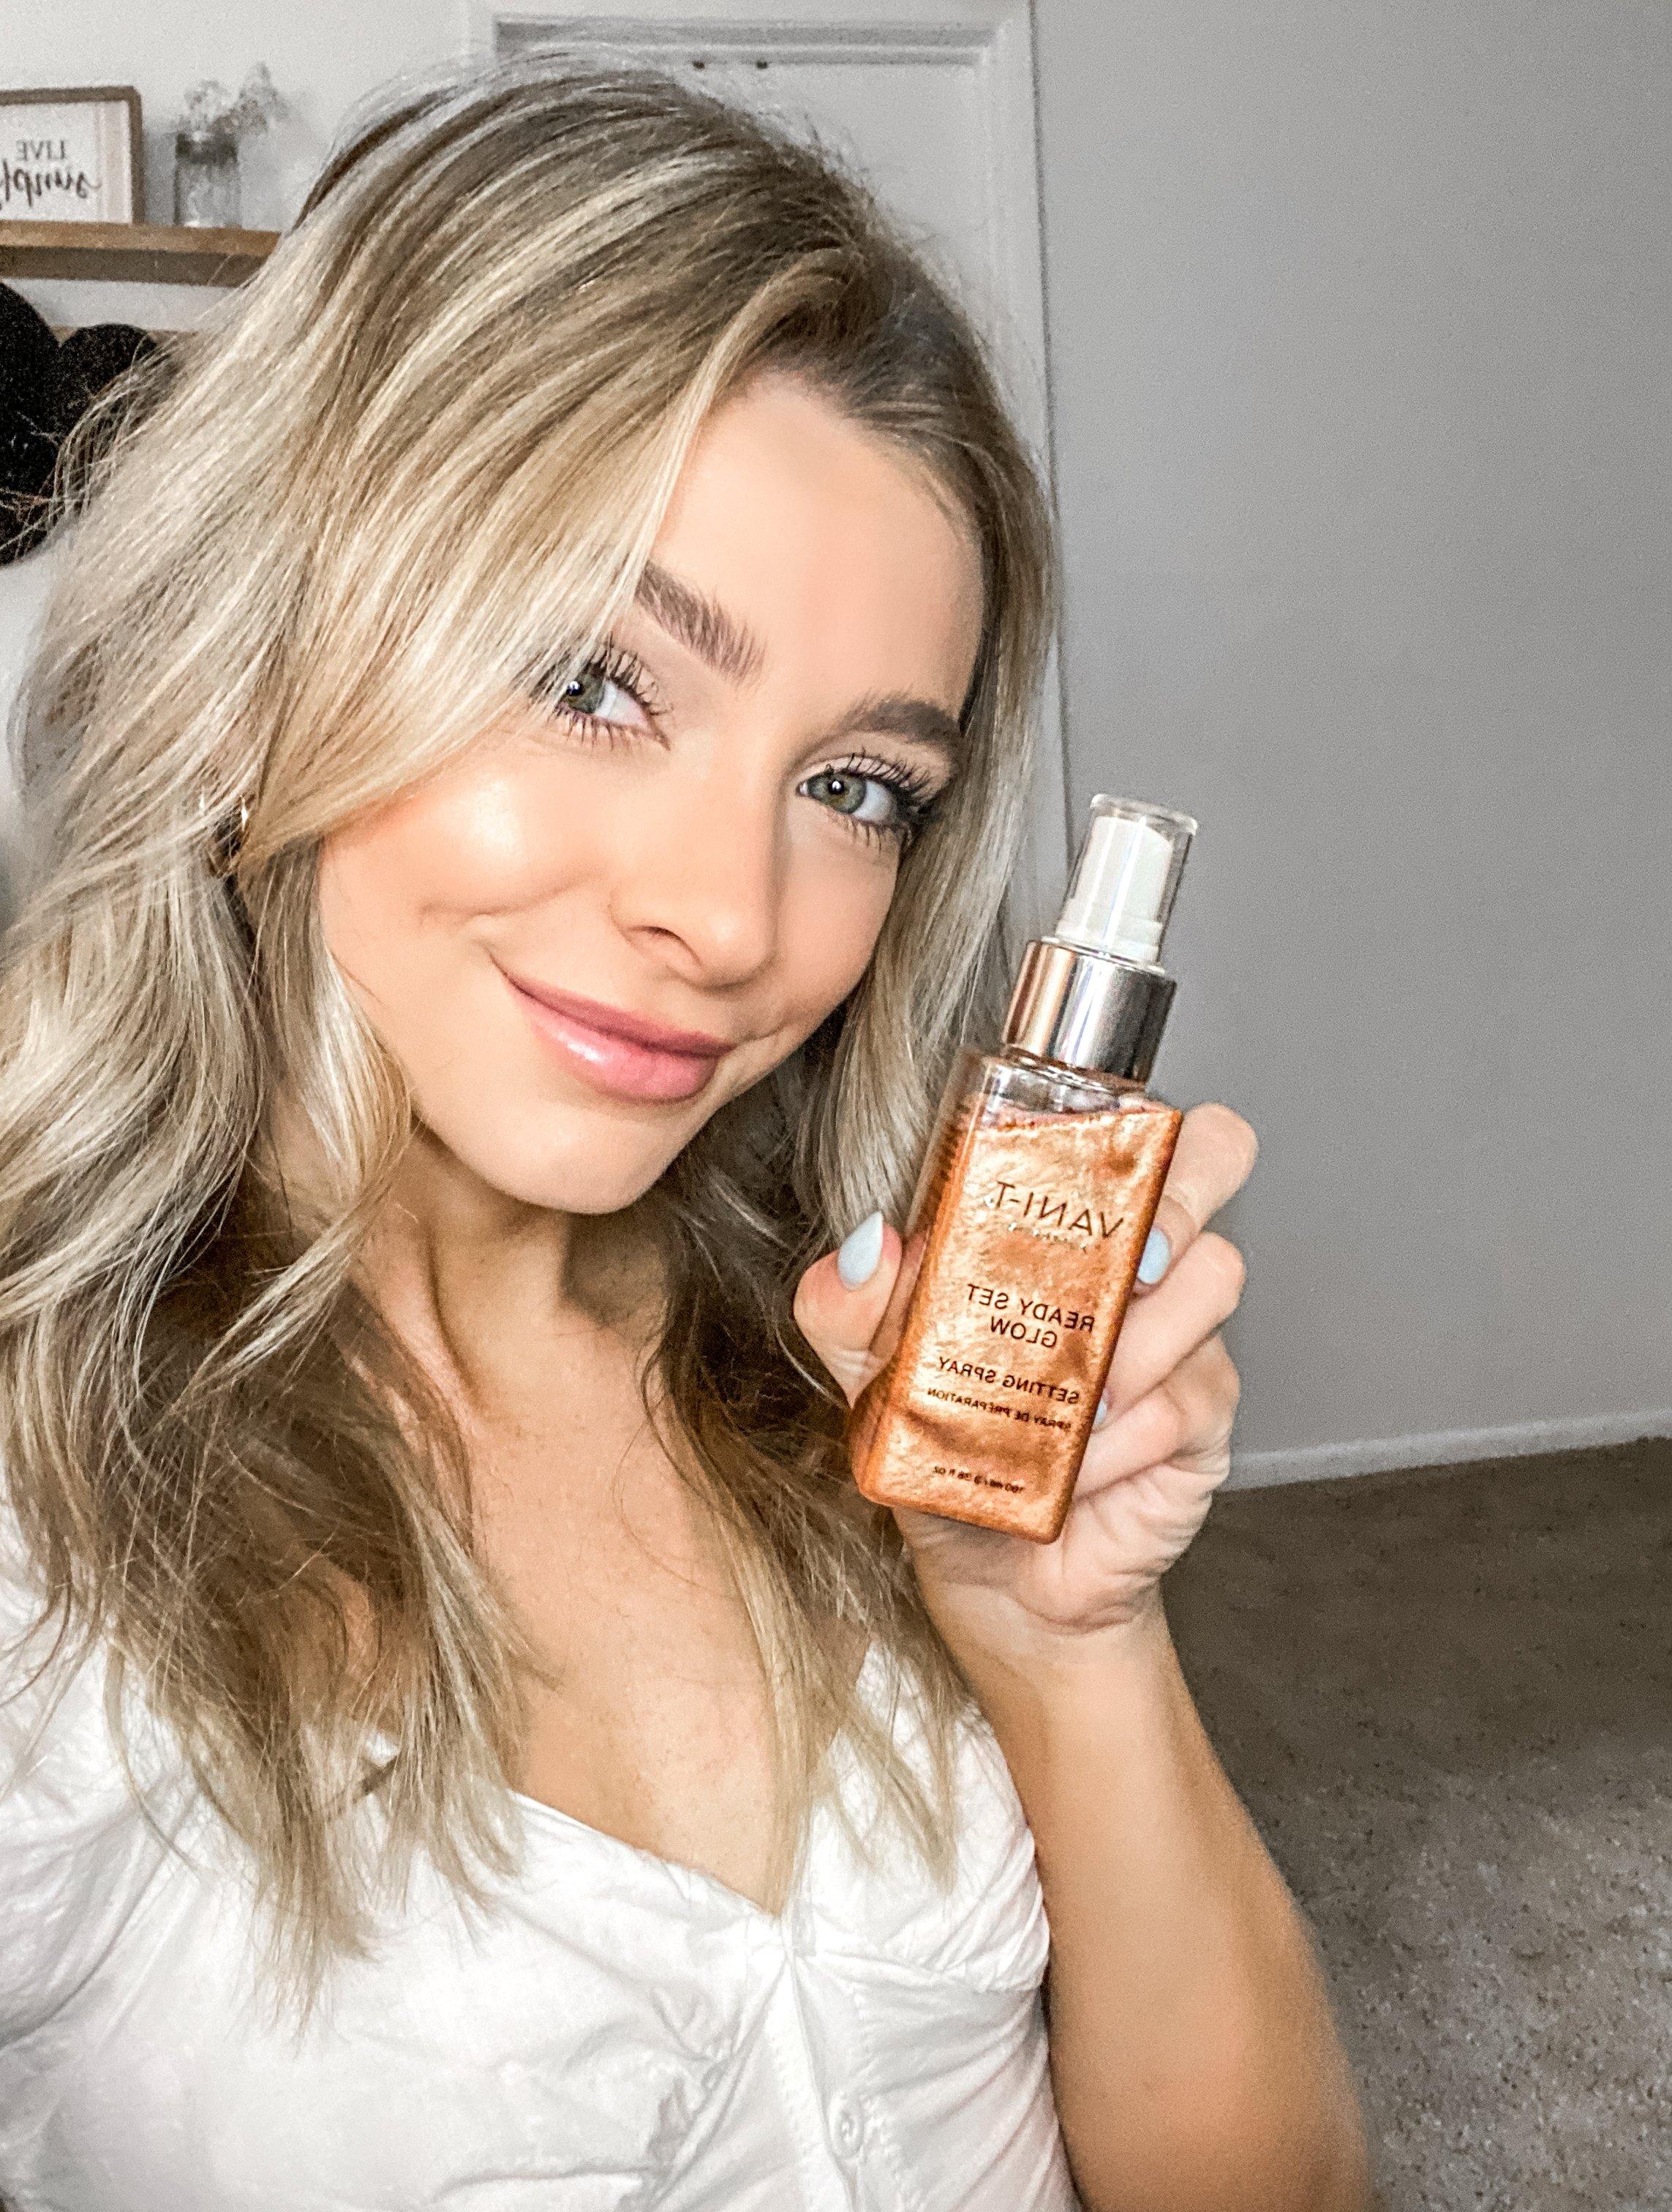 Ready Set Glow | Setting Spray - Pure Beauty Collective